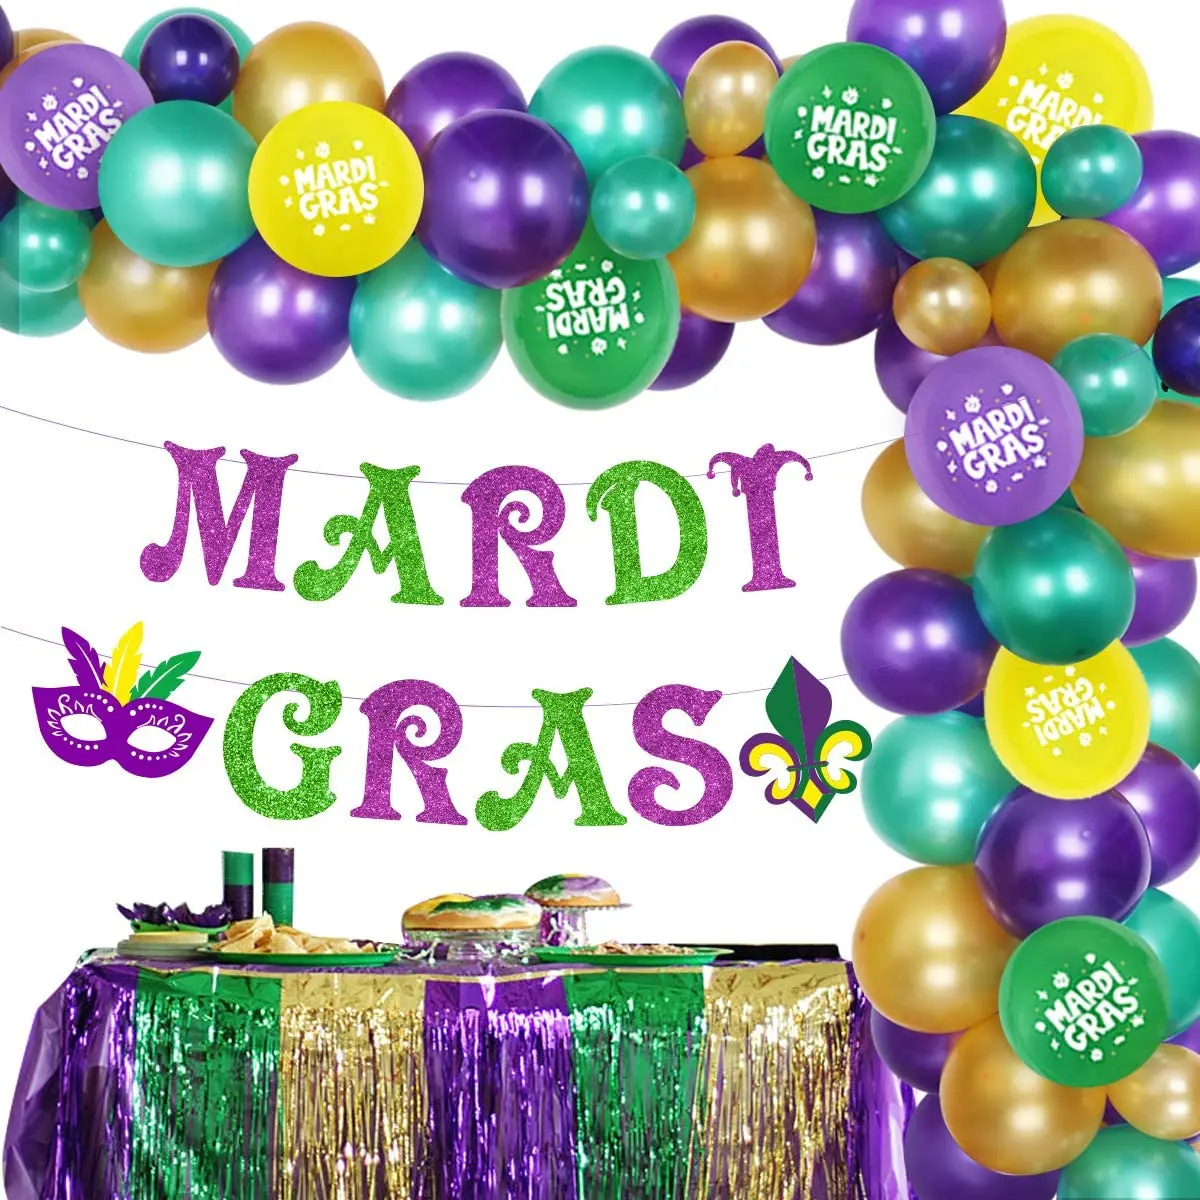 

Mardi Gras Party Decoration Balloon Garland Arch Kit Purple Green Glitter Banner Mask for Fat Tuesday New Orleans Party Supplies